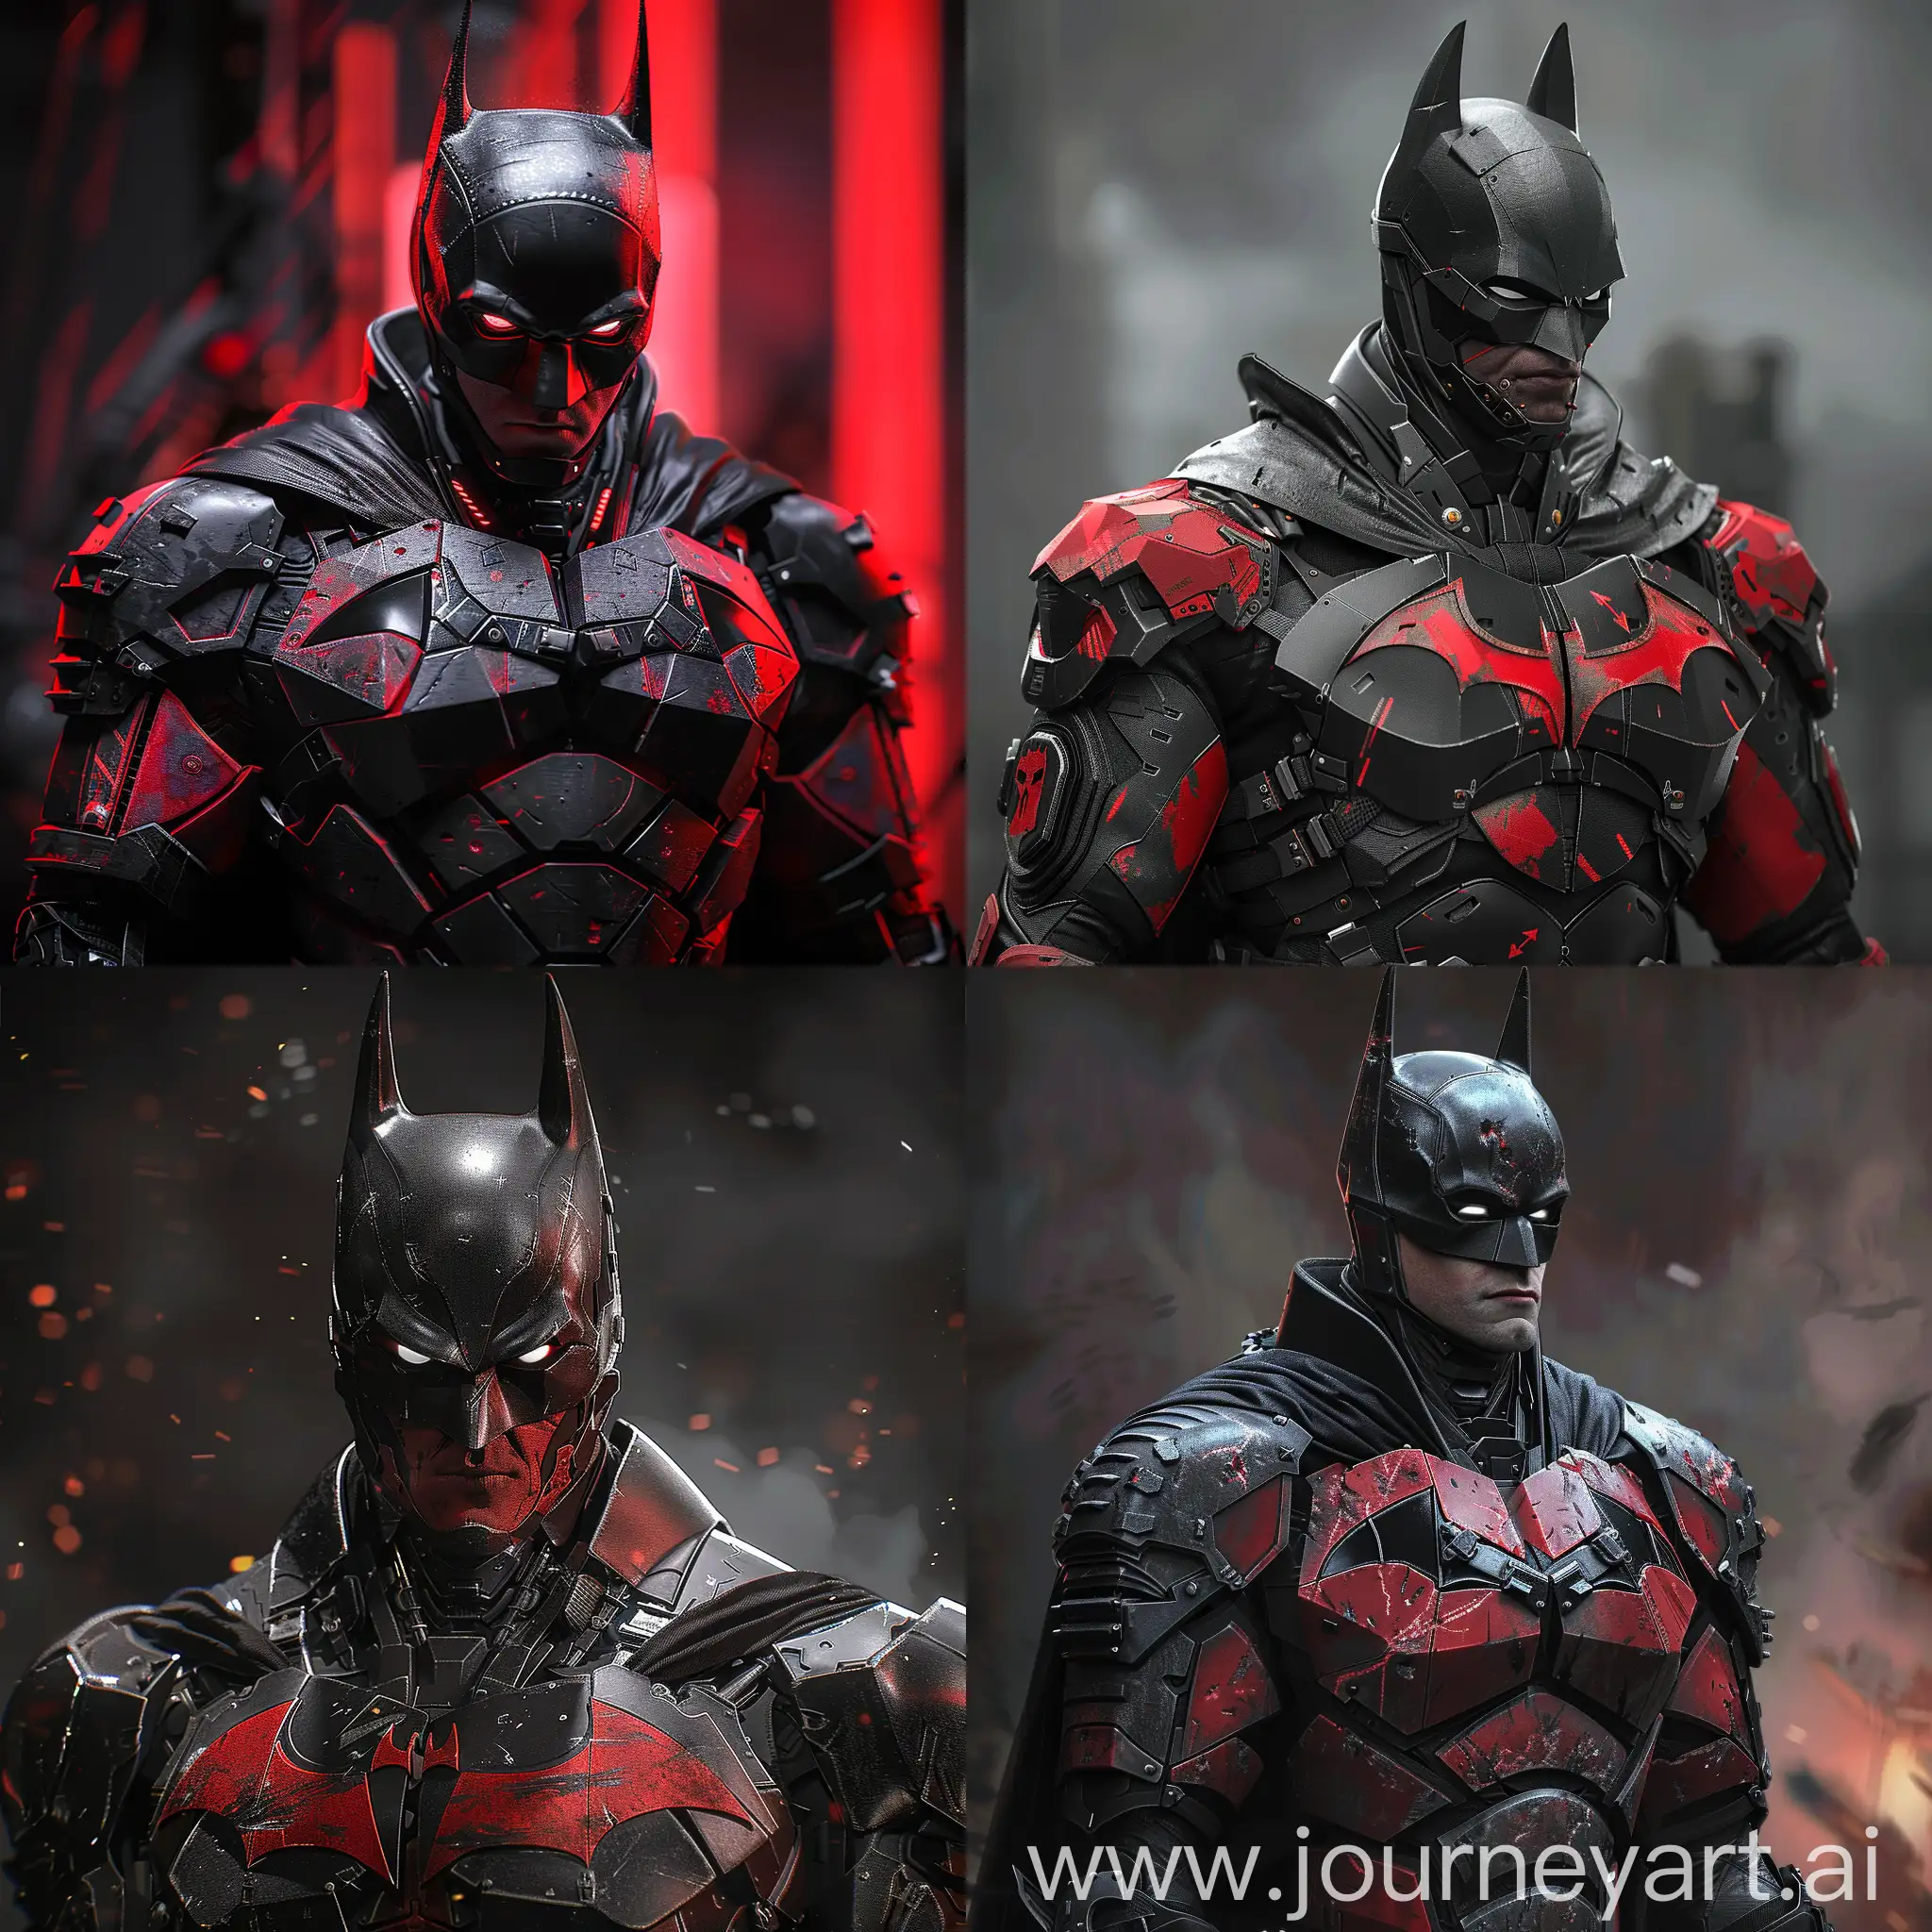 Detailed-Portrait-of-Batman-in-Red-and-Black-Armor-Killzone-Outfit